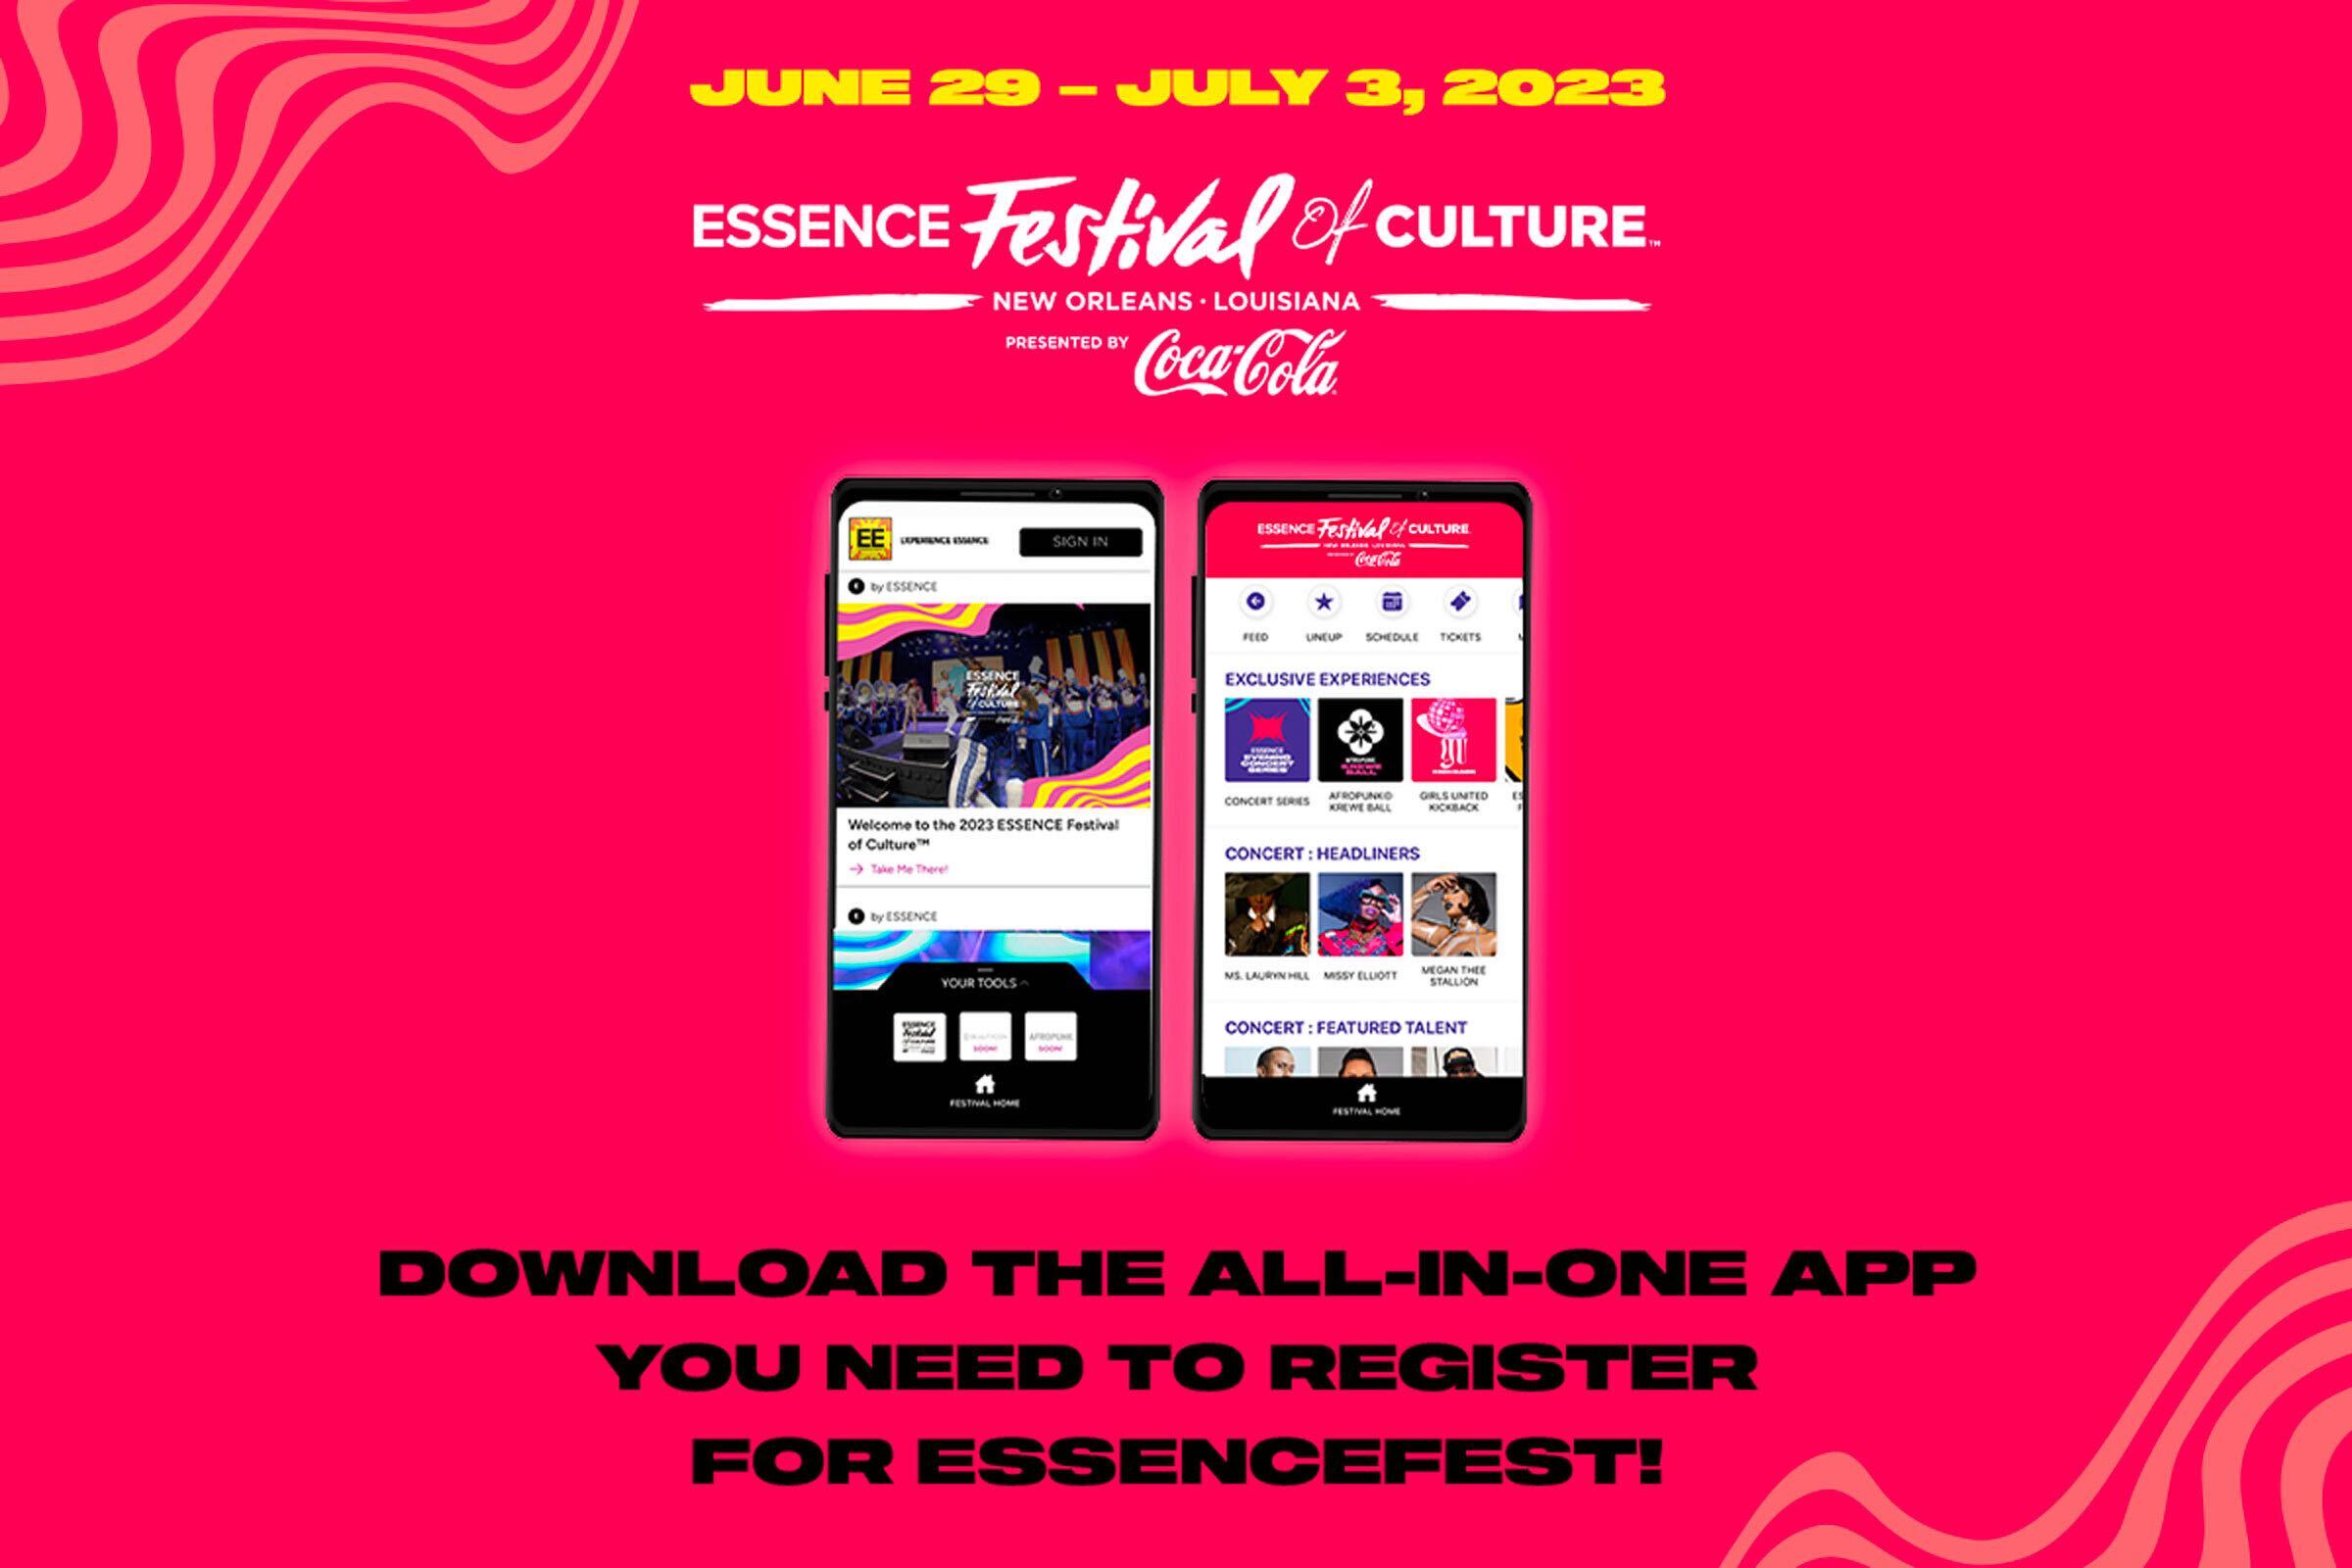 Here’s How To Win Essence Festival Tickets On Official Mobile App